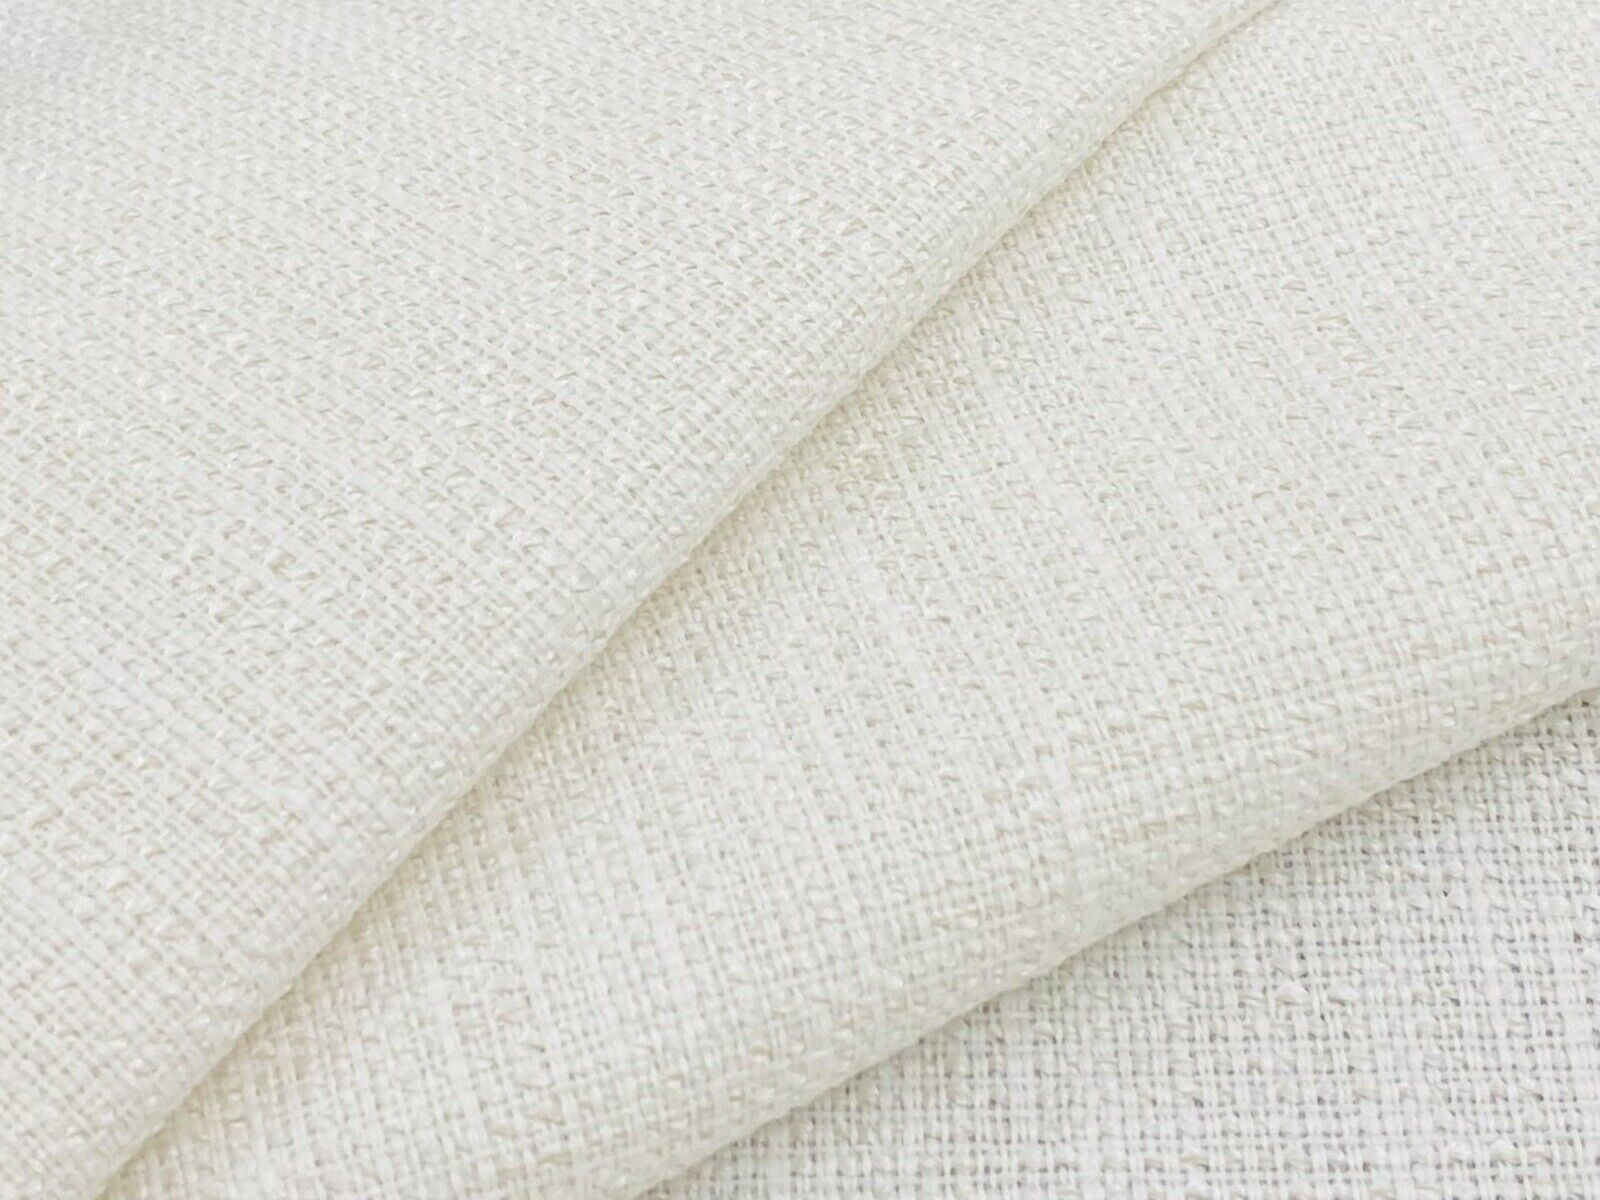 Kravet INSIDE OUT White Performance Outdoor Tweed Uphol Fabric 5.25 yds 35518-1